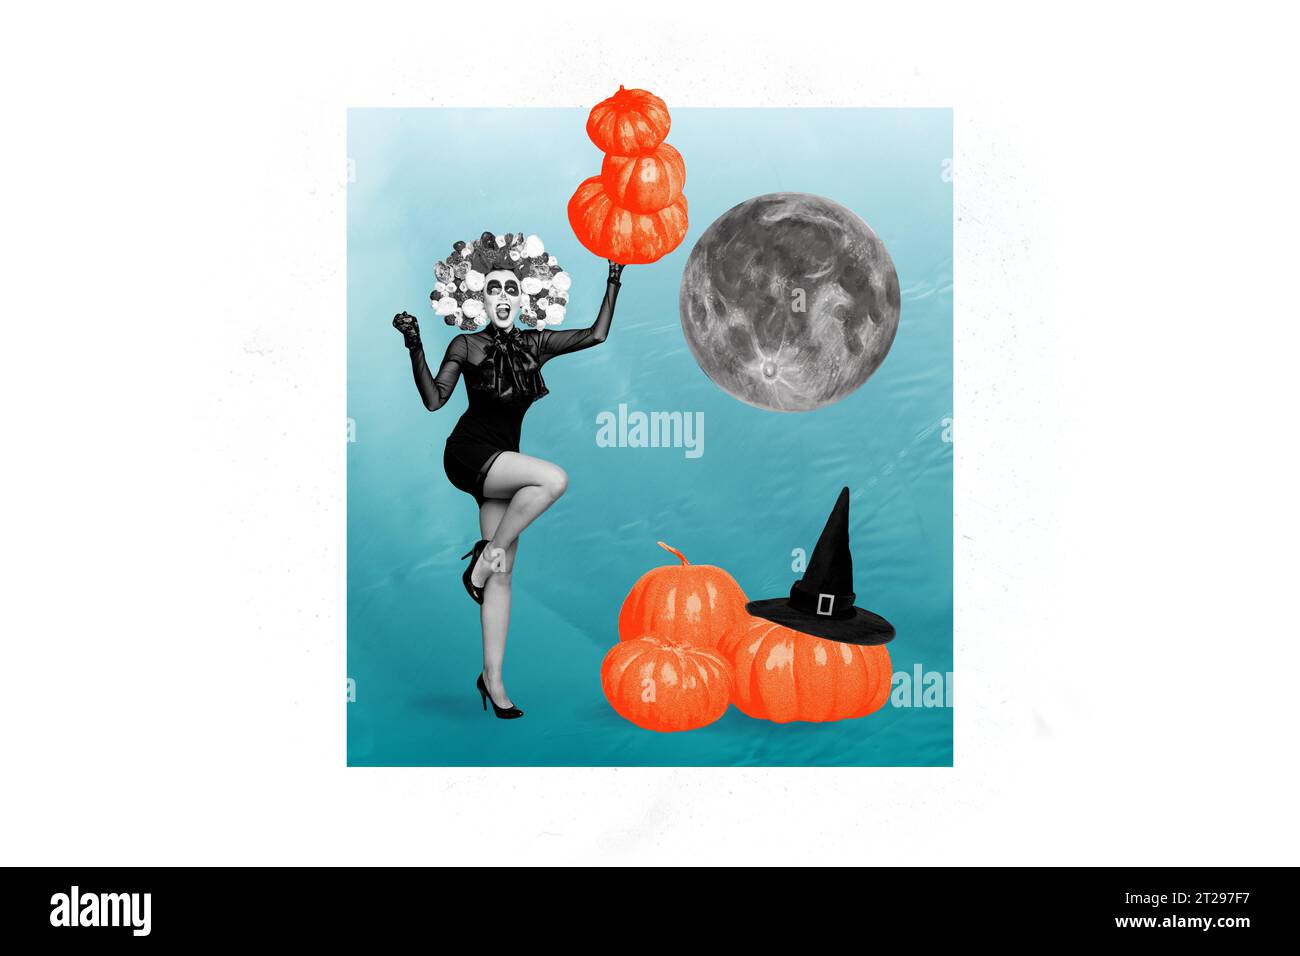 Creative poster collage of attractive funny dancing excited calavera catrina witch costume full moon pumpkins halloween party concept Stock Photo